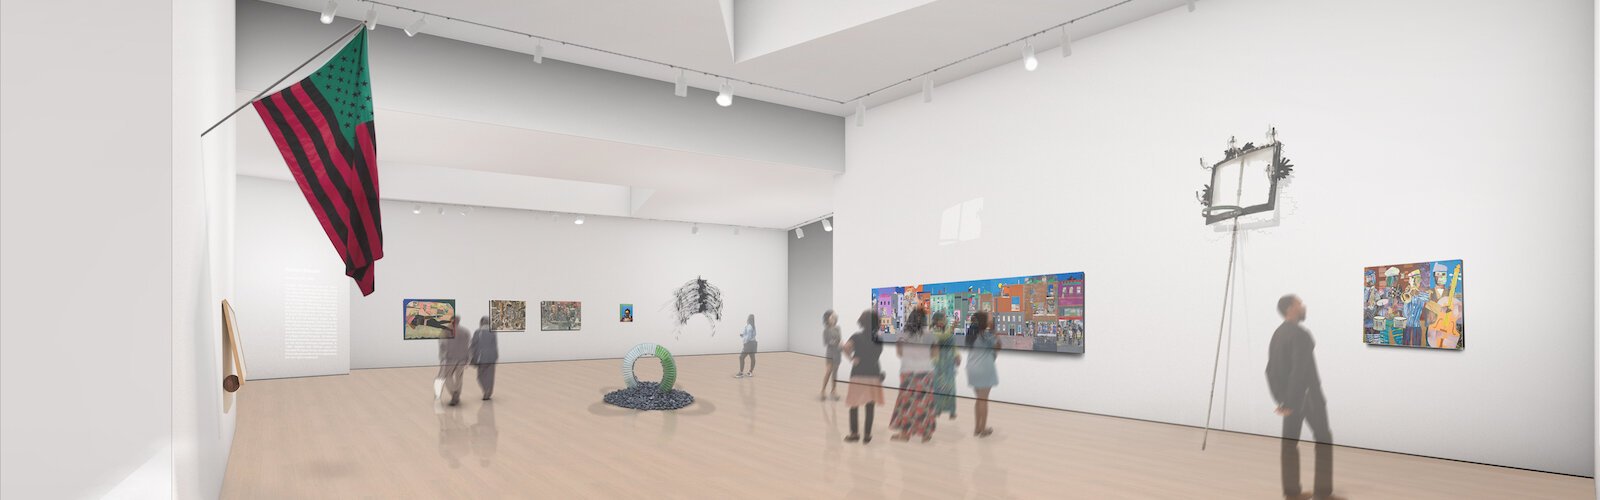 Vision for future gallery space at new, modern Dr. Carter G. Woodson African American Museum. 